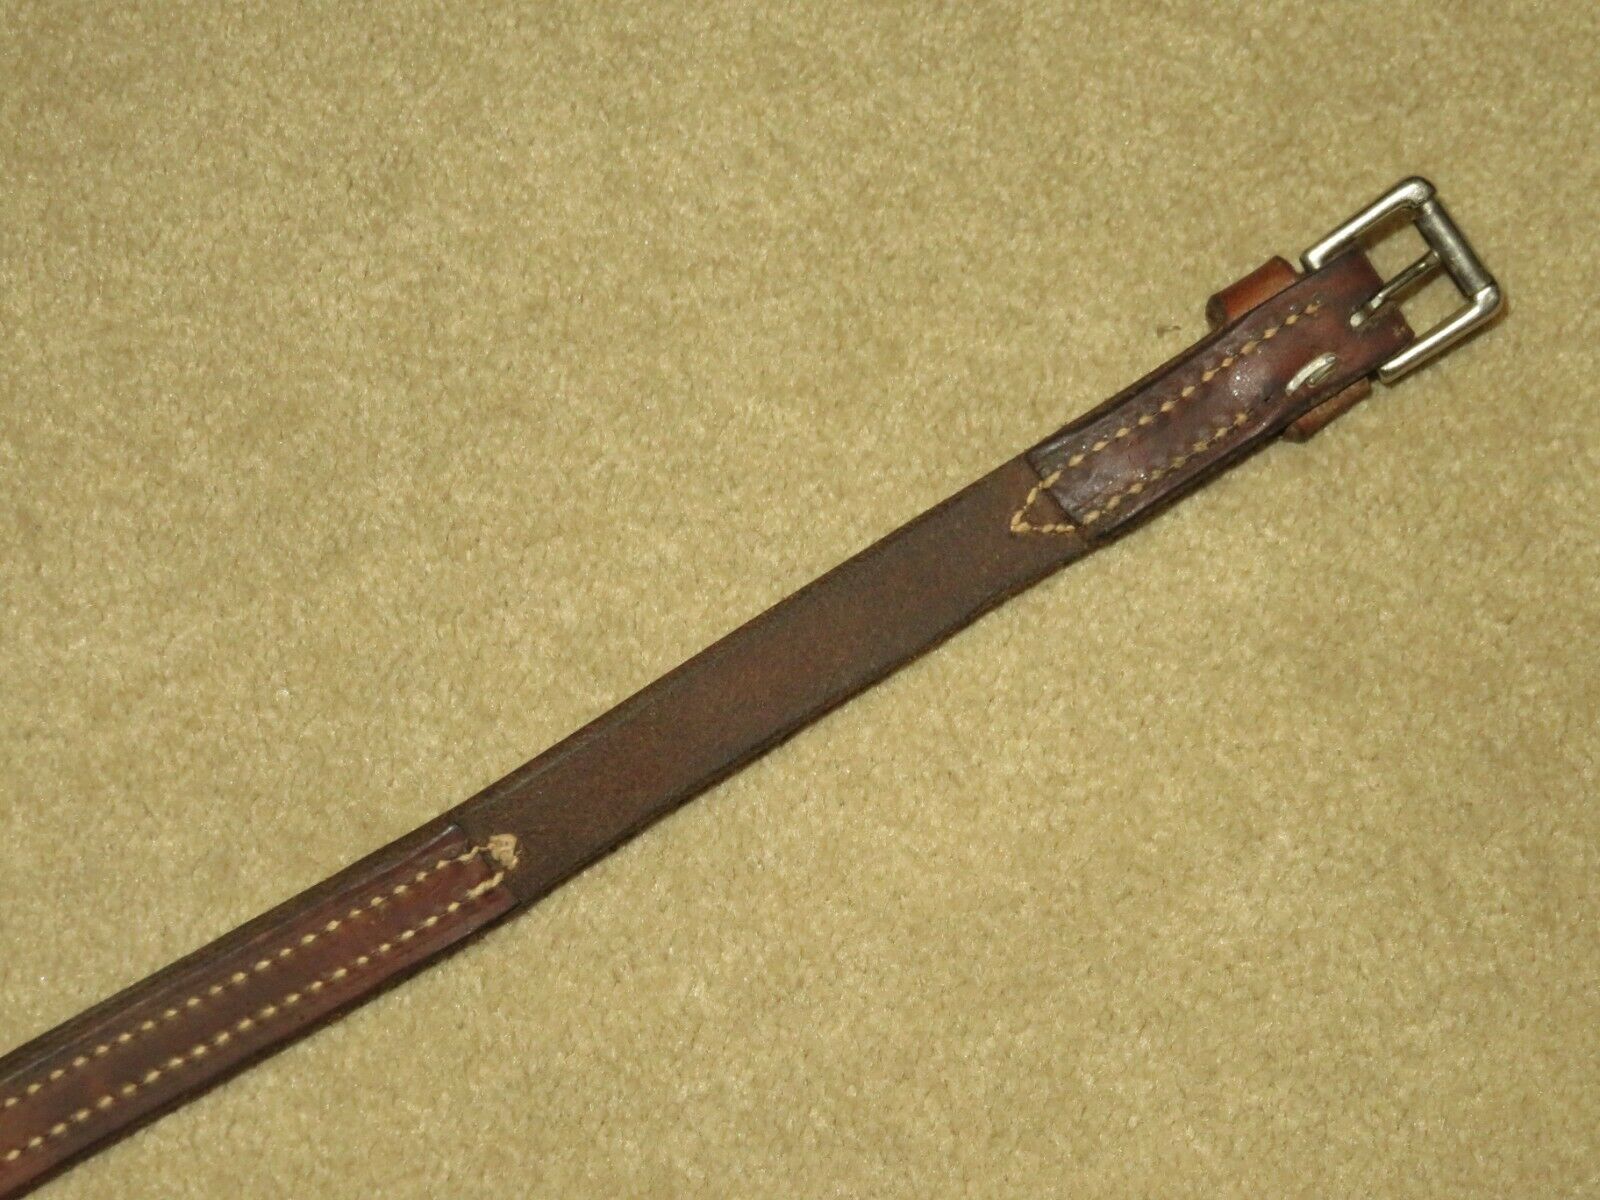 Light Use HIGH QUALITY Supple 5/8" Stitched Brown Leather Dog Collar ~ Size 26"